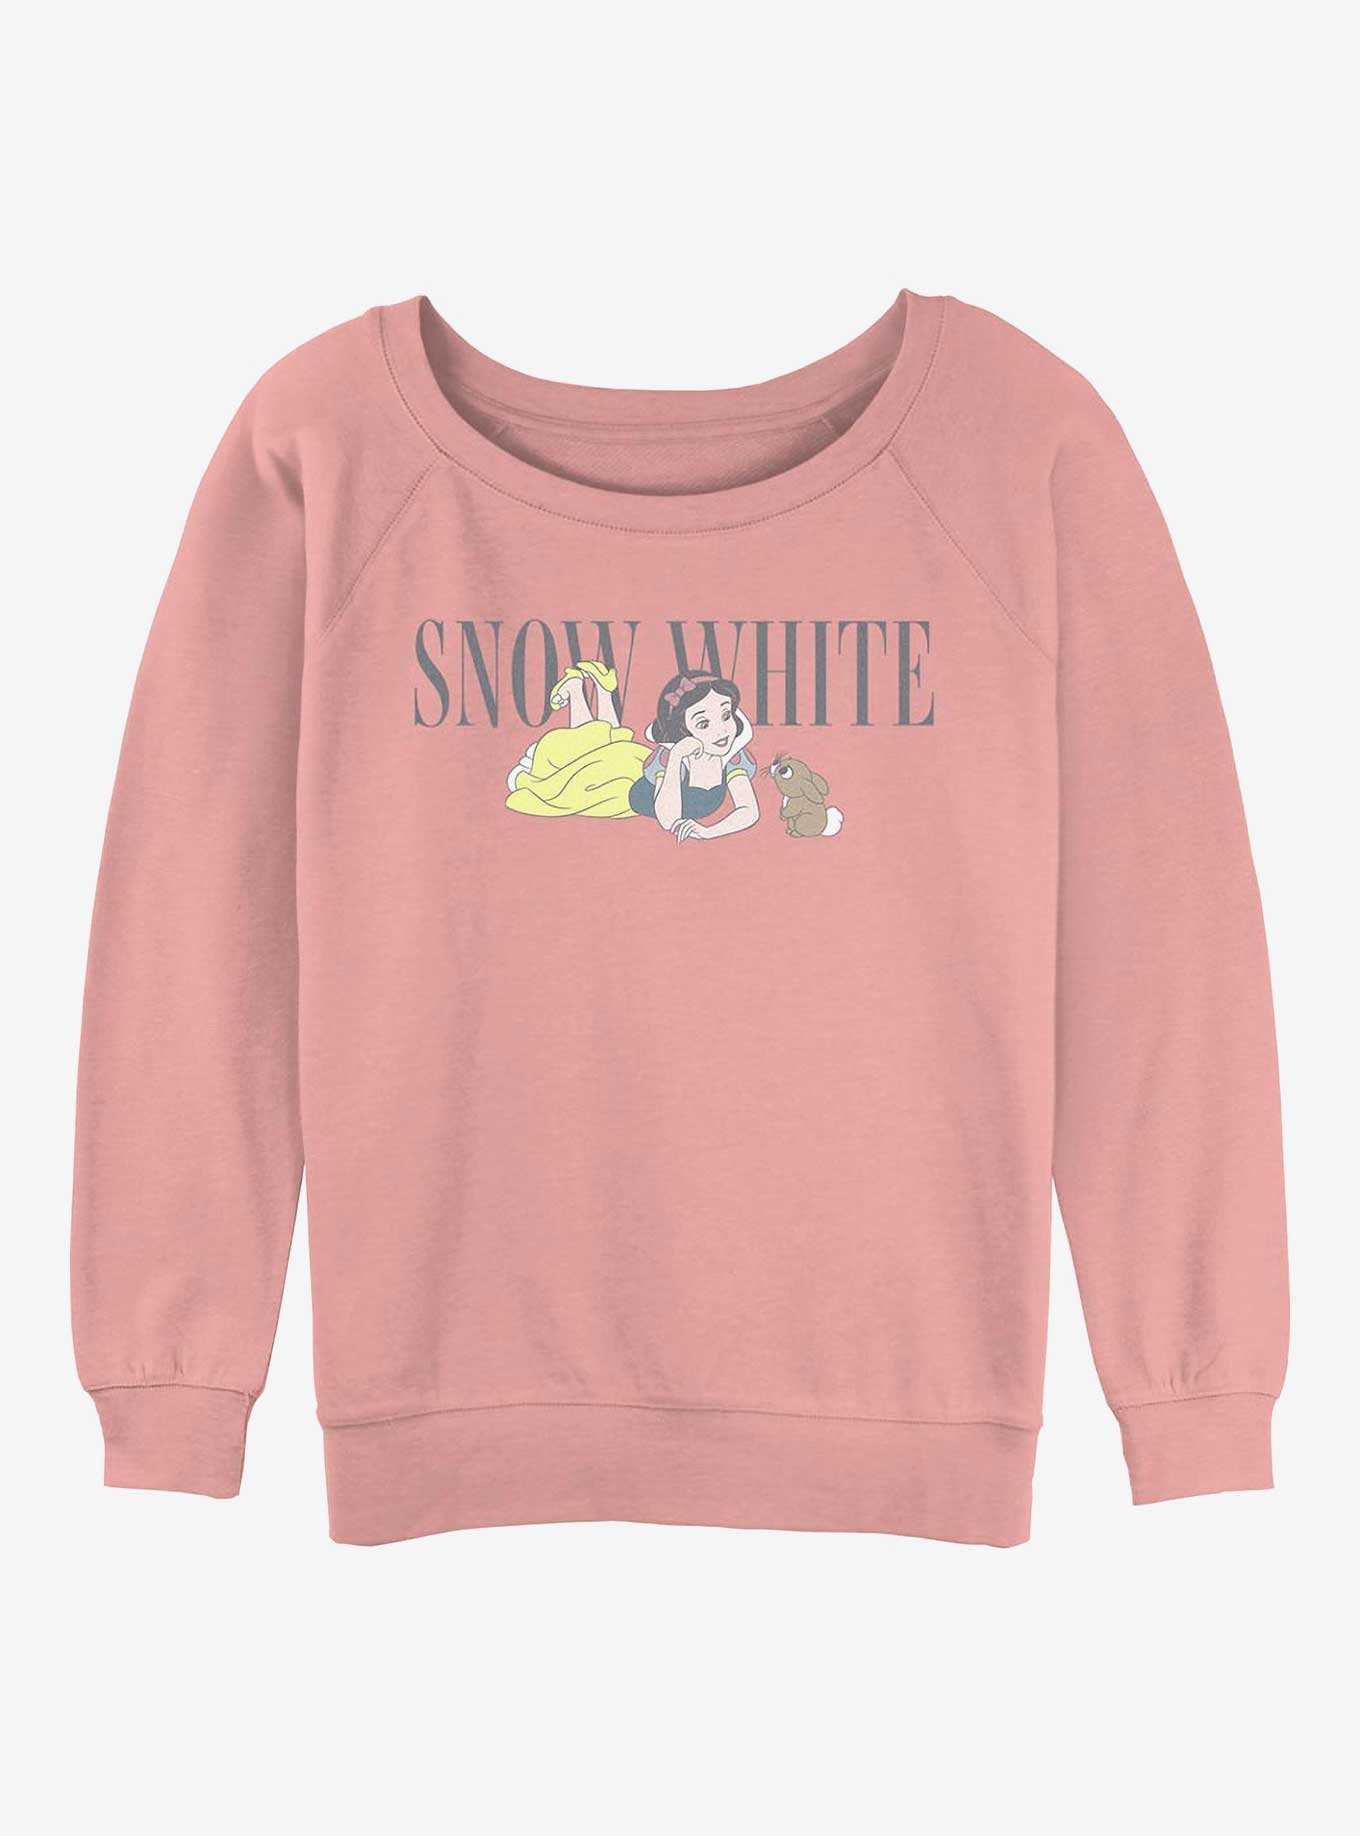 Disney Snow White and the Seven Dwarfs and Forest Friend Girls Slouchy Sweatshirt, , hi-res